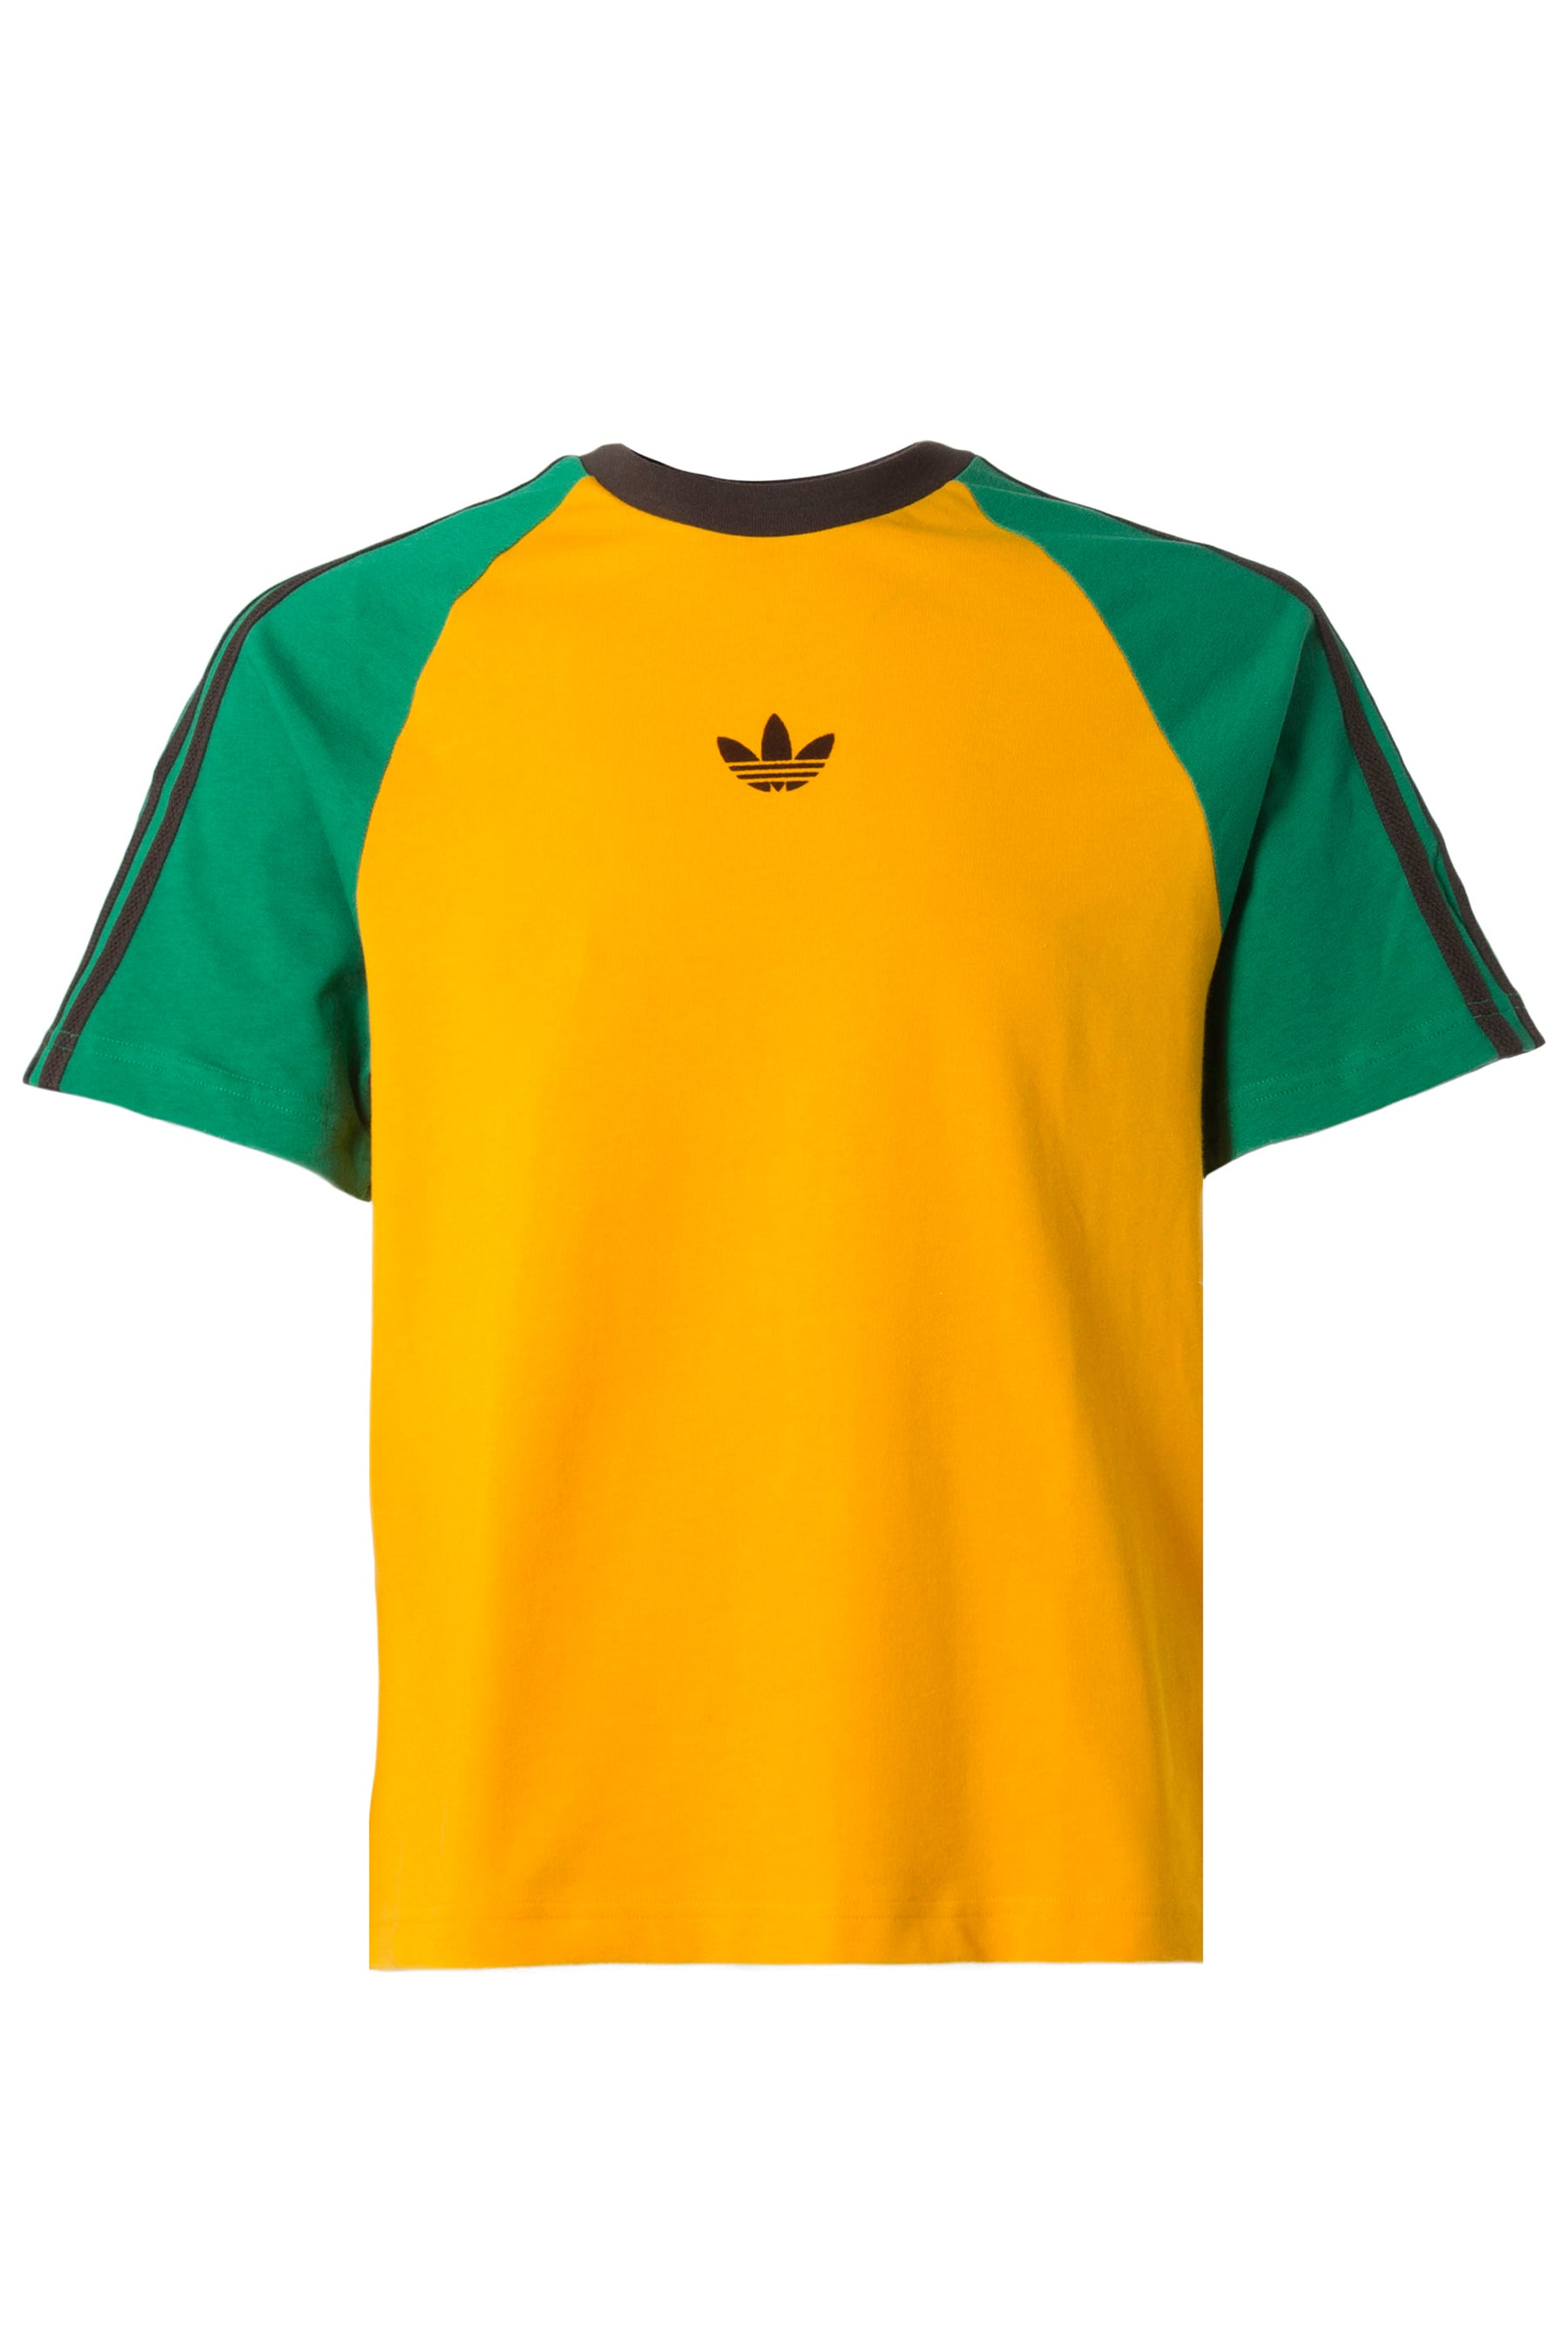 S/S TEE WB GOLD COLLEGIATE / Bonner -NUBIAN SS23 adidas×Wales